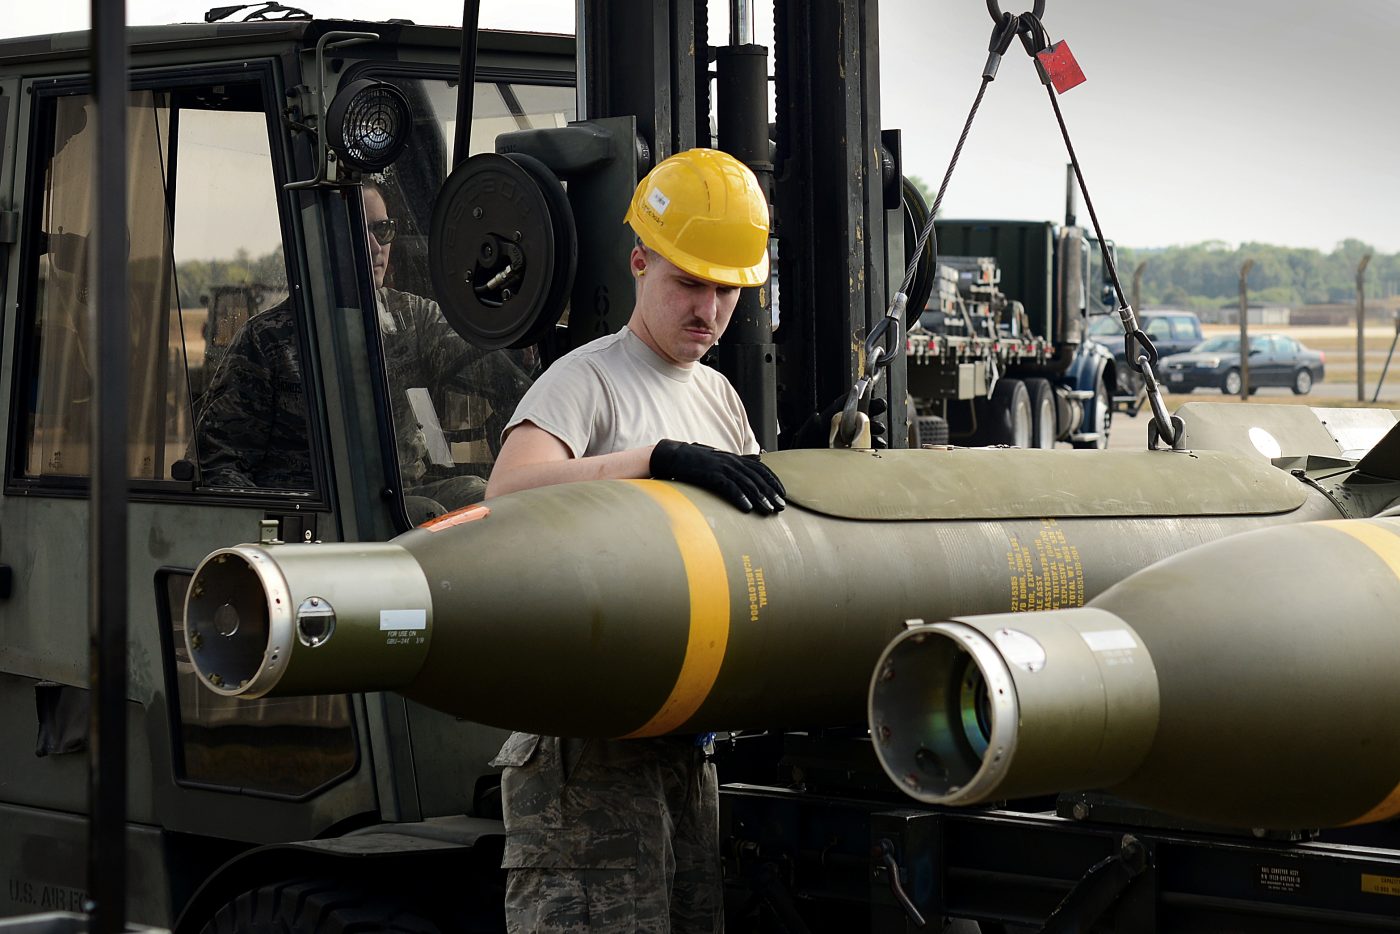 Photo: A 48th Fighter Wing munitions Airman prepares a GBU-24 Paveway III laser-guided bomb for transport during the United States Air Forces in Europe-Air Forces Africa’s inaugural Combat Ammunition Production Exercise July 17, 2018. During the exercise, munitions experts demonstrated their ability to build a variety of munitions including joint air-to-surface standoff missiles, air-to-air missiles, joint direct attack munitions, laser-guided bombs and small diameter bombs. Credit: U.S. Air Force photo/ Tech. Sgt. Matthew Plew via dvids